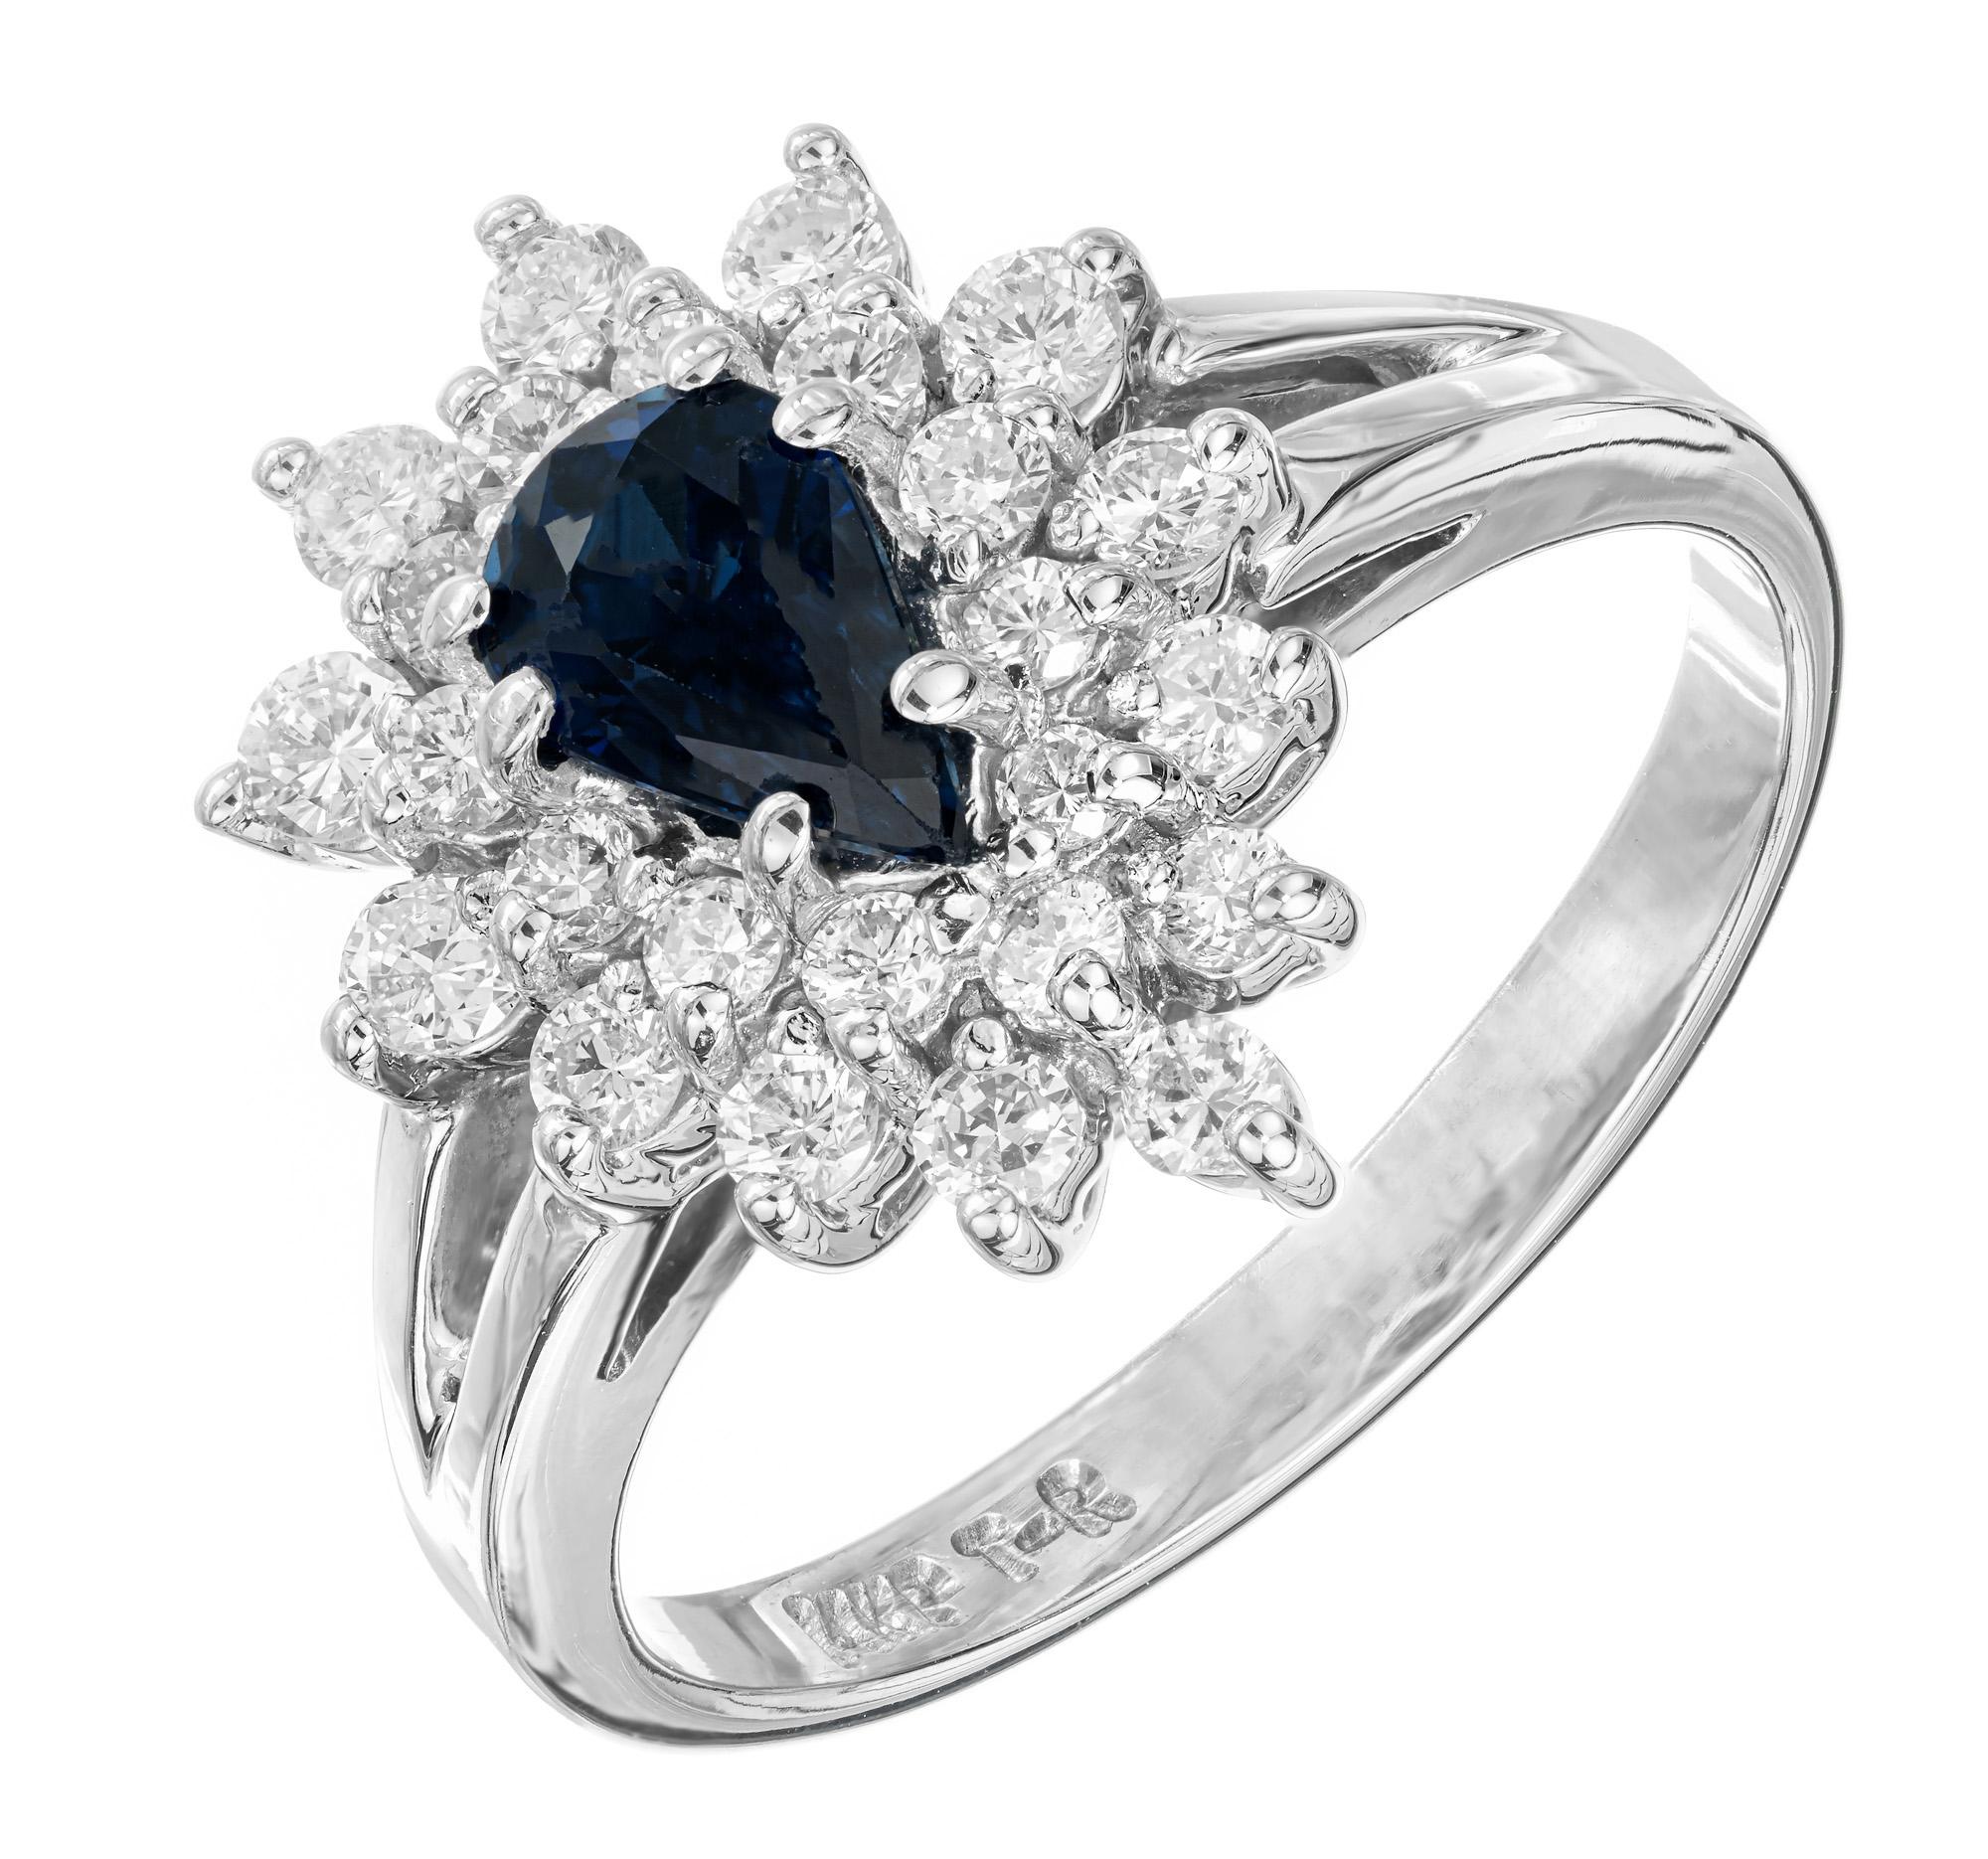 Blue sapphire and diamond engagement ring. Pear shaped .50ct sapphire center stone, with a two row halo of 25 round cut diamonds in a 14k white gold setting.

1 pear shaped greenish blue sapphire, approx. .50cts
12 round diamond, I-J SI approx.